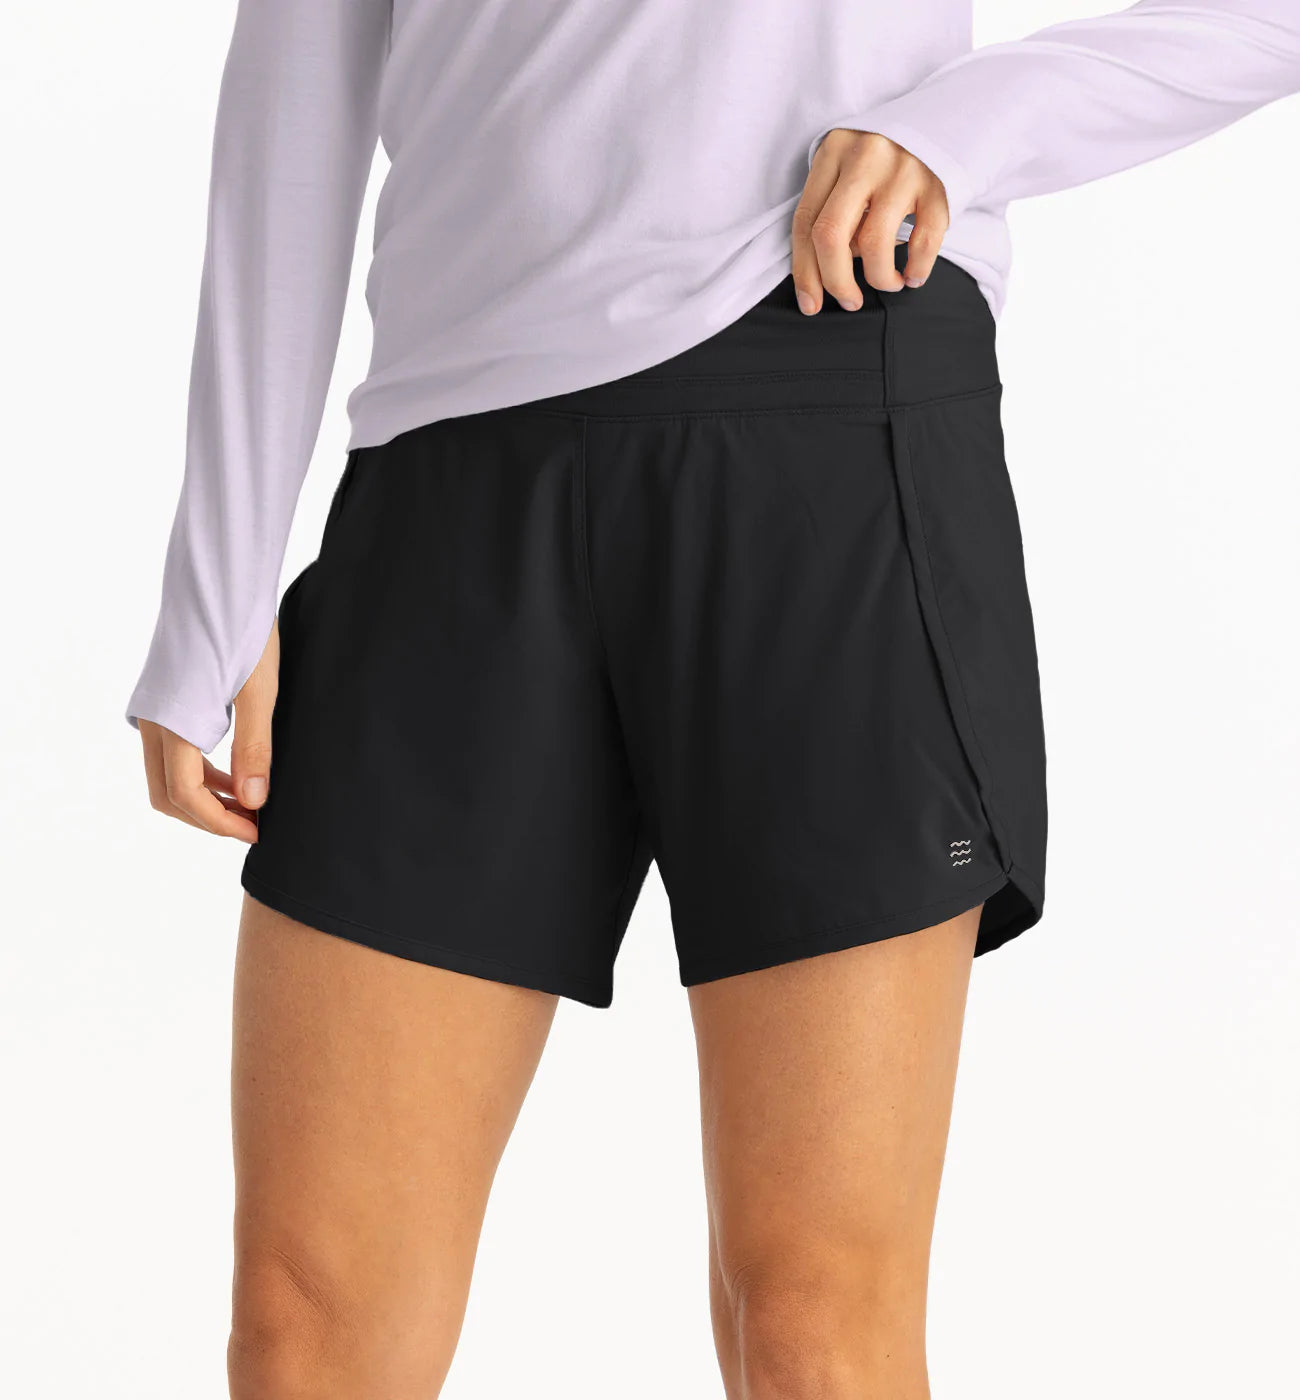 Free Fly Women's Bamboo Lined Breeze Short 6in - Black, XL